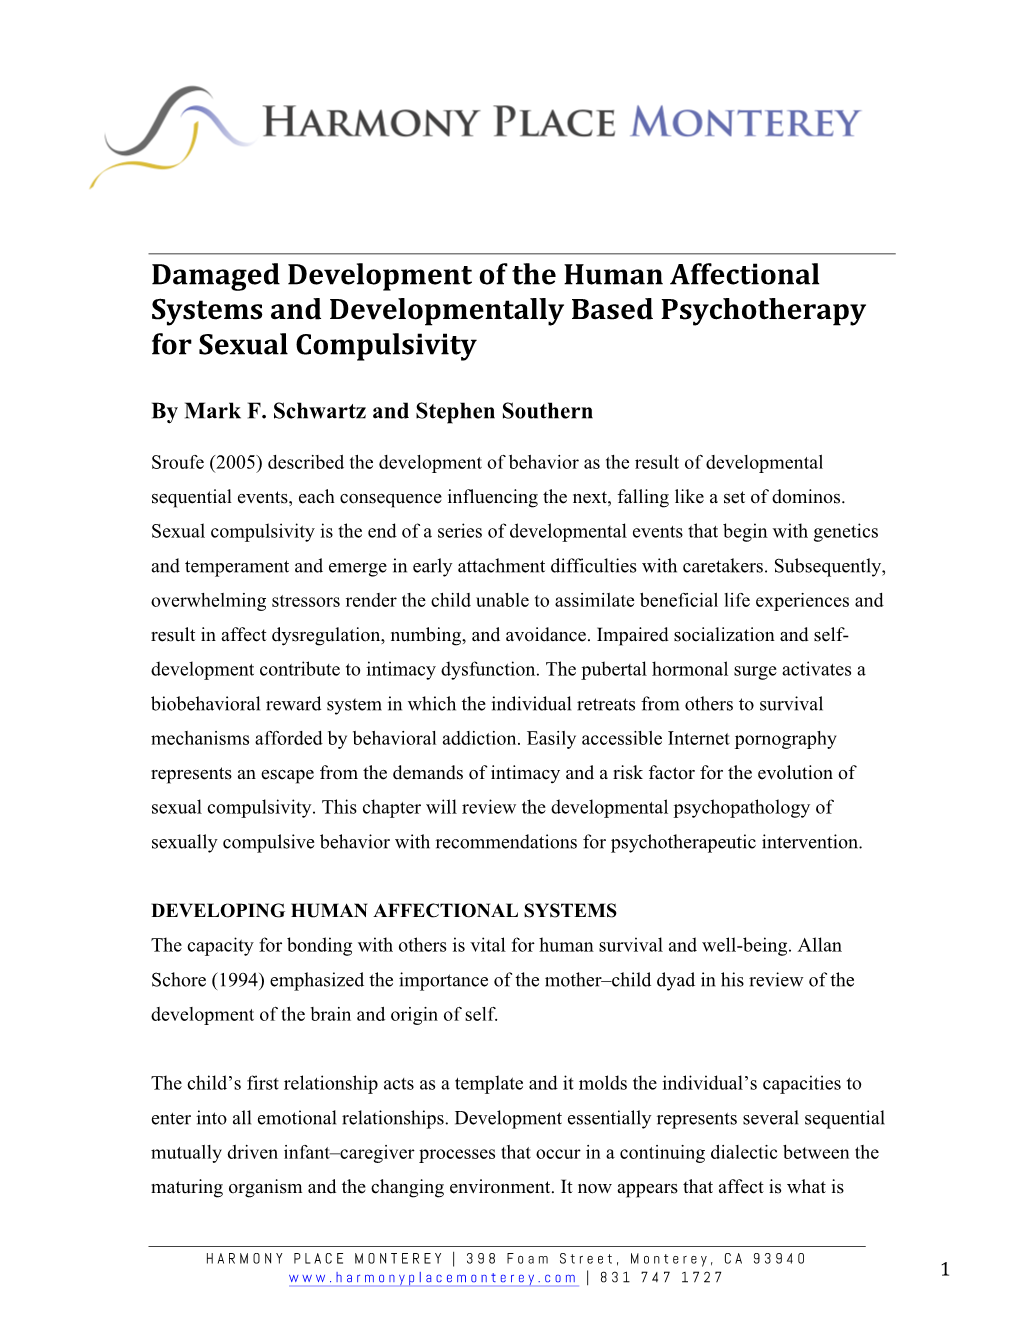 Damaged Development of the Human Affectional Systems and Developmentally Based Psychotherapy for Sexual Compulsivity